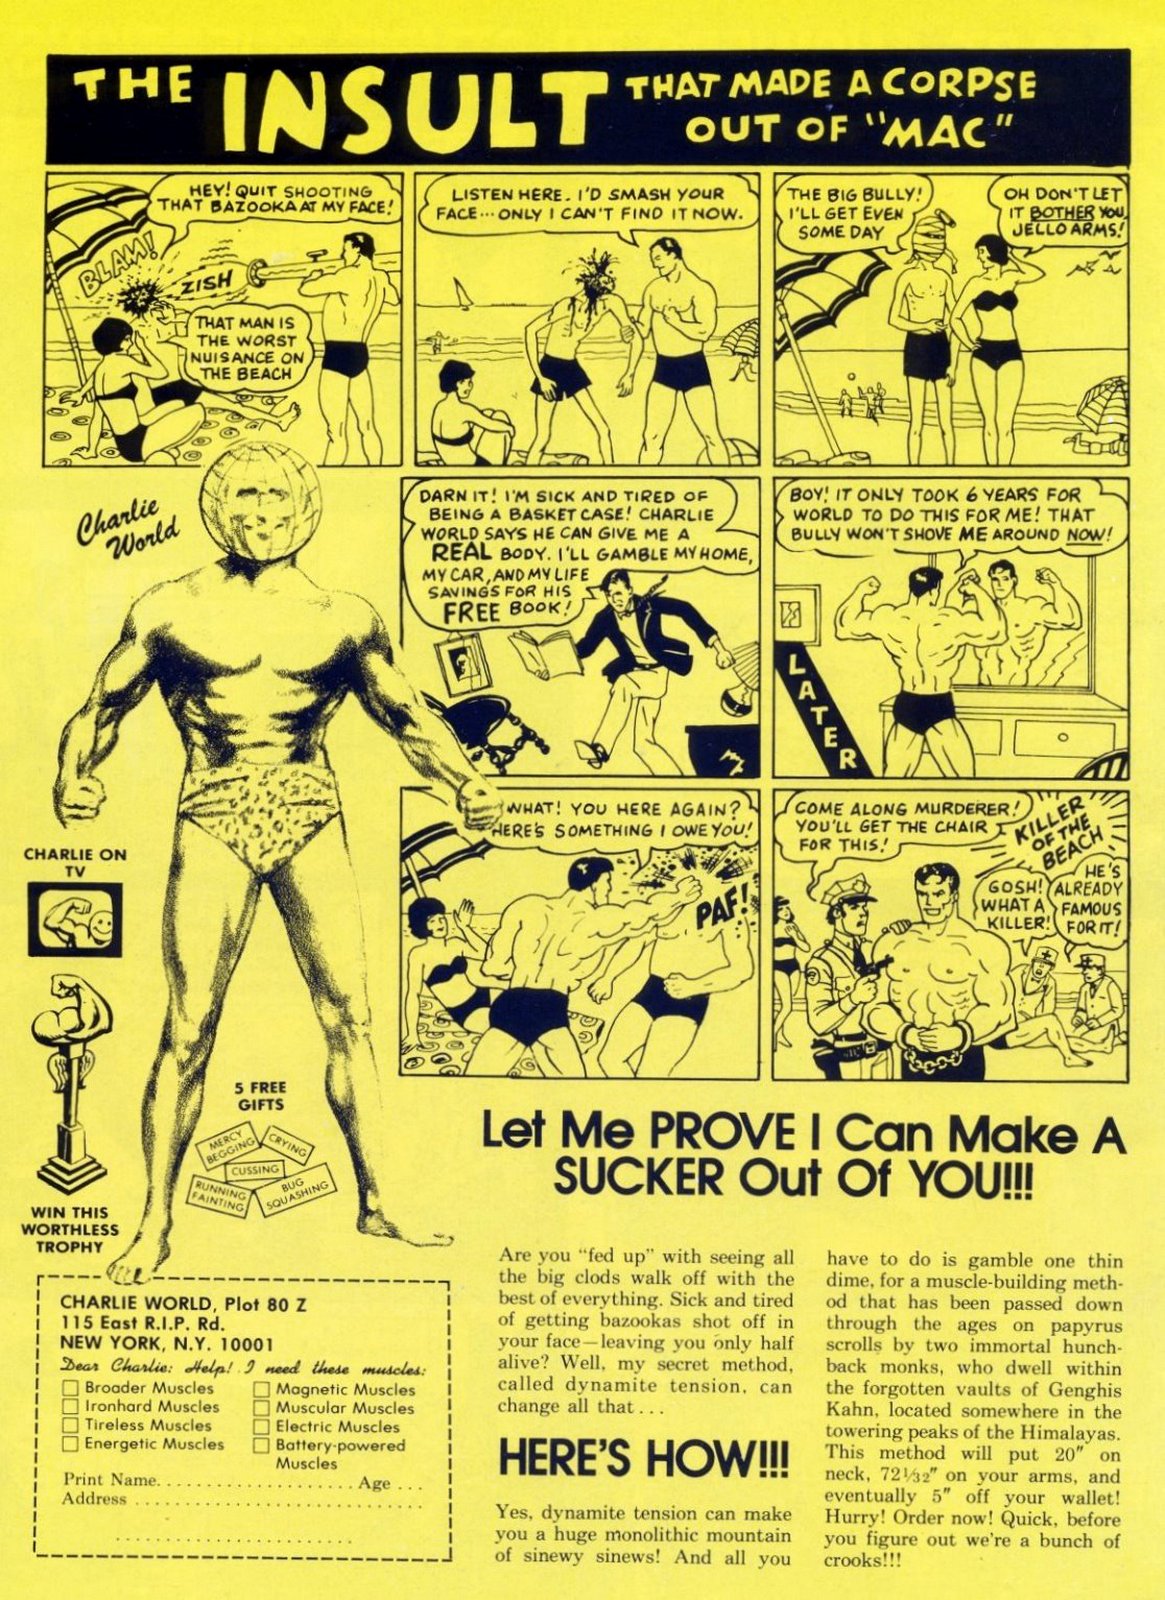 A 1974 advert for body building techniques by Charles Atlas. Here a comic  strip depicts a beach scene featuring a bully kicking sand in a  'weakling's' face - this is the catalyst